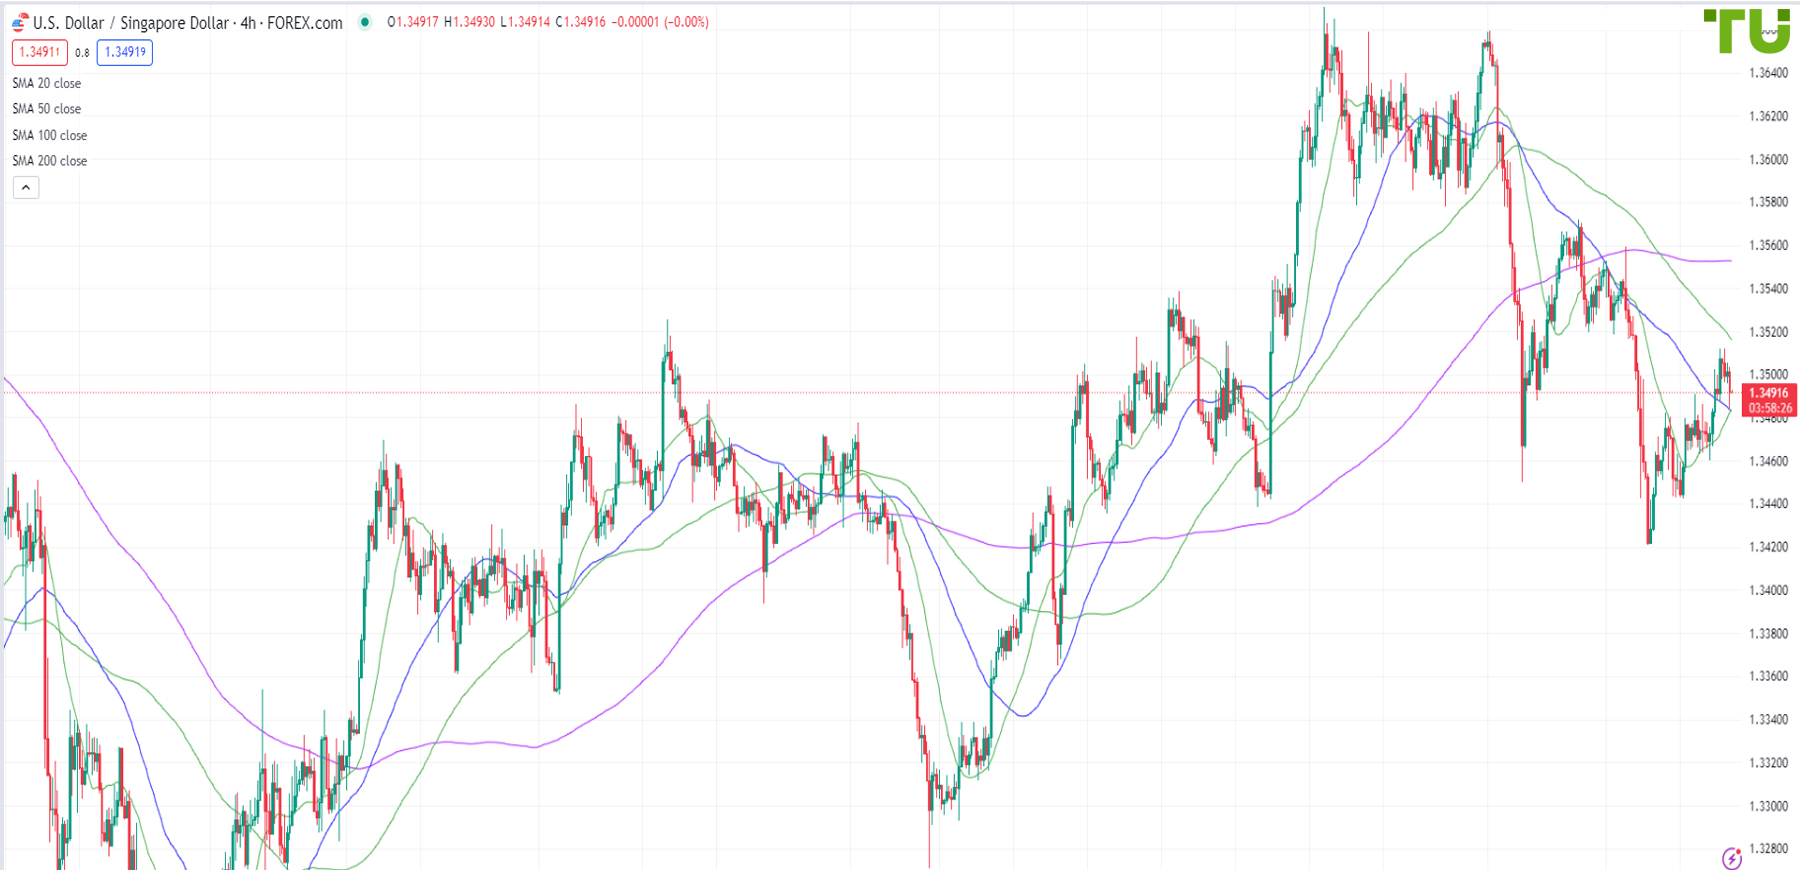 USD/SGD under pressure after attempted rally